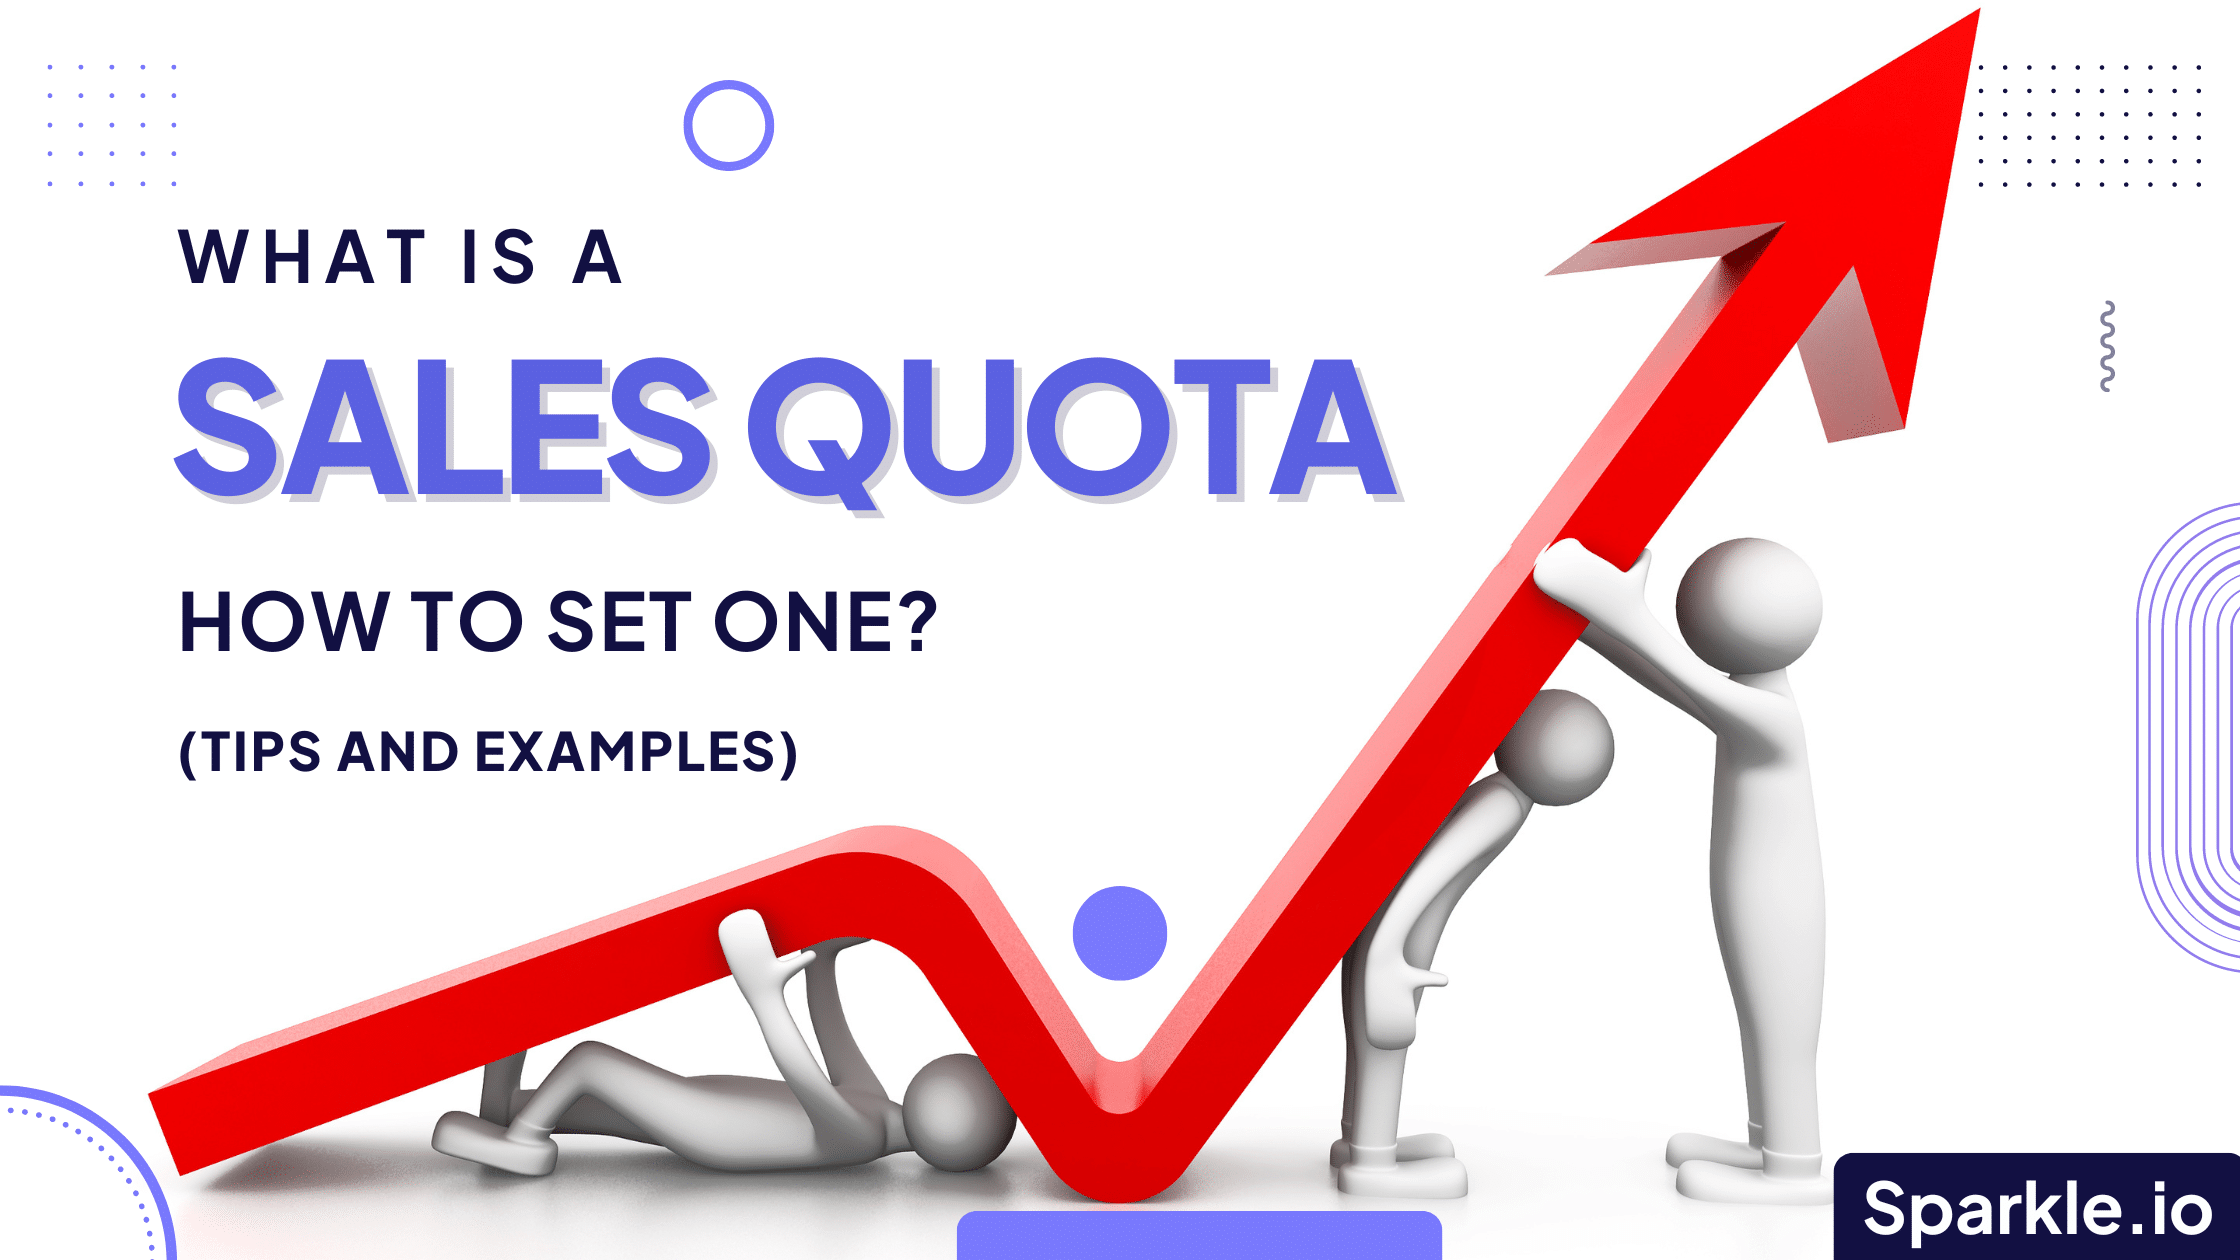 What Is a Sales Quota? How to Set One (Tips and Examples)